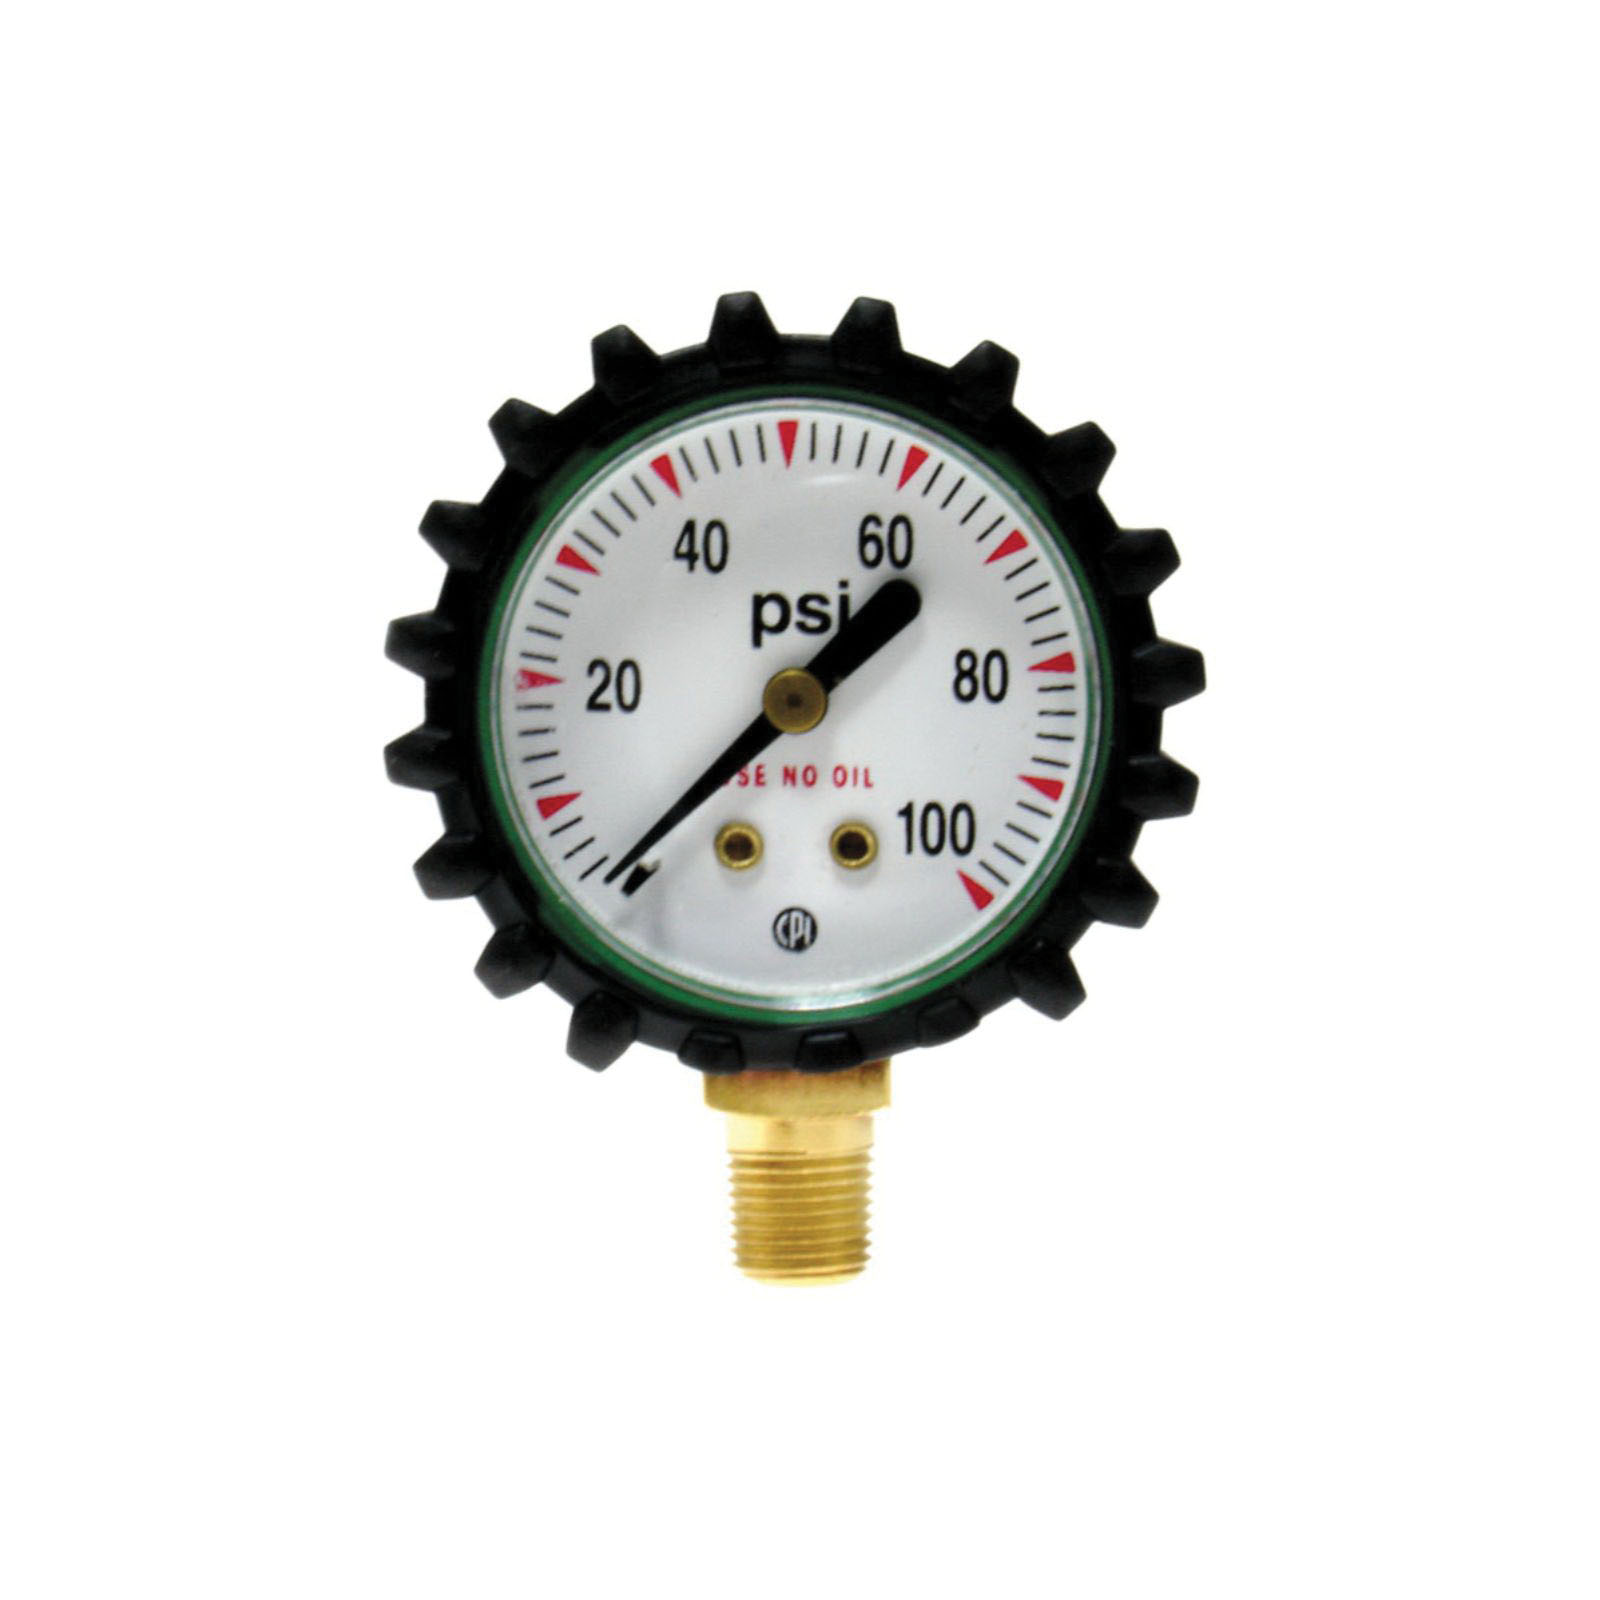 UNIWELD® G49D Replacement Pressure Gauge, 1-1/2 in Dial, 0 to 100 psi Measuring Range, 3-2-3 % Accuracy